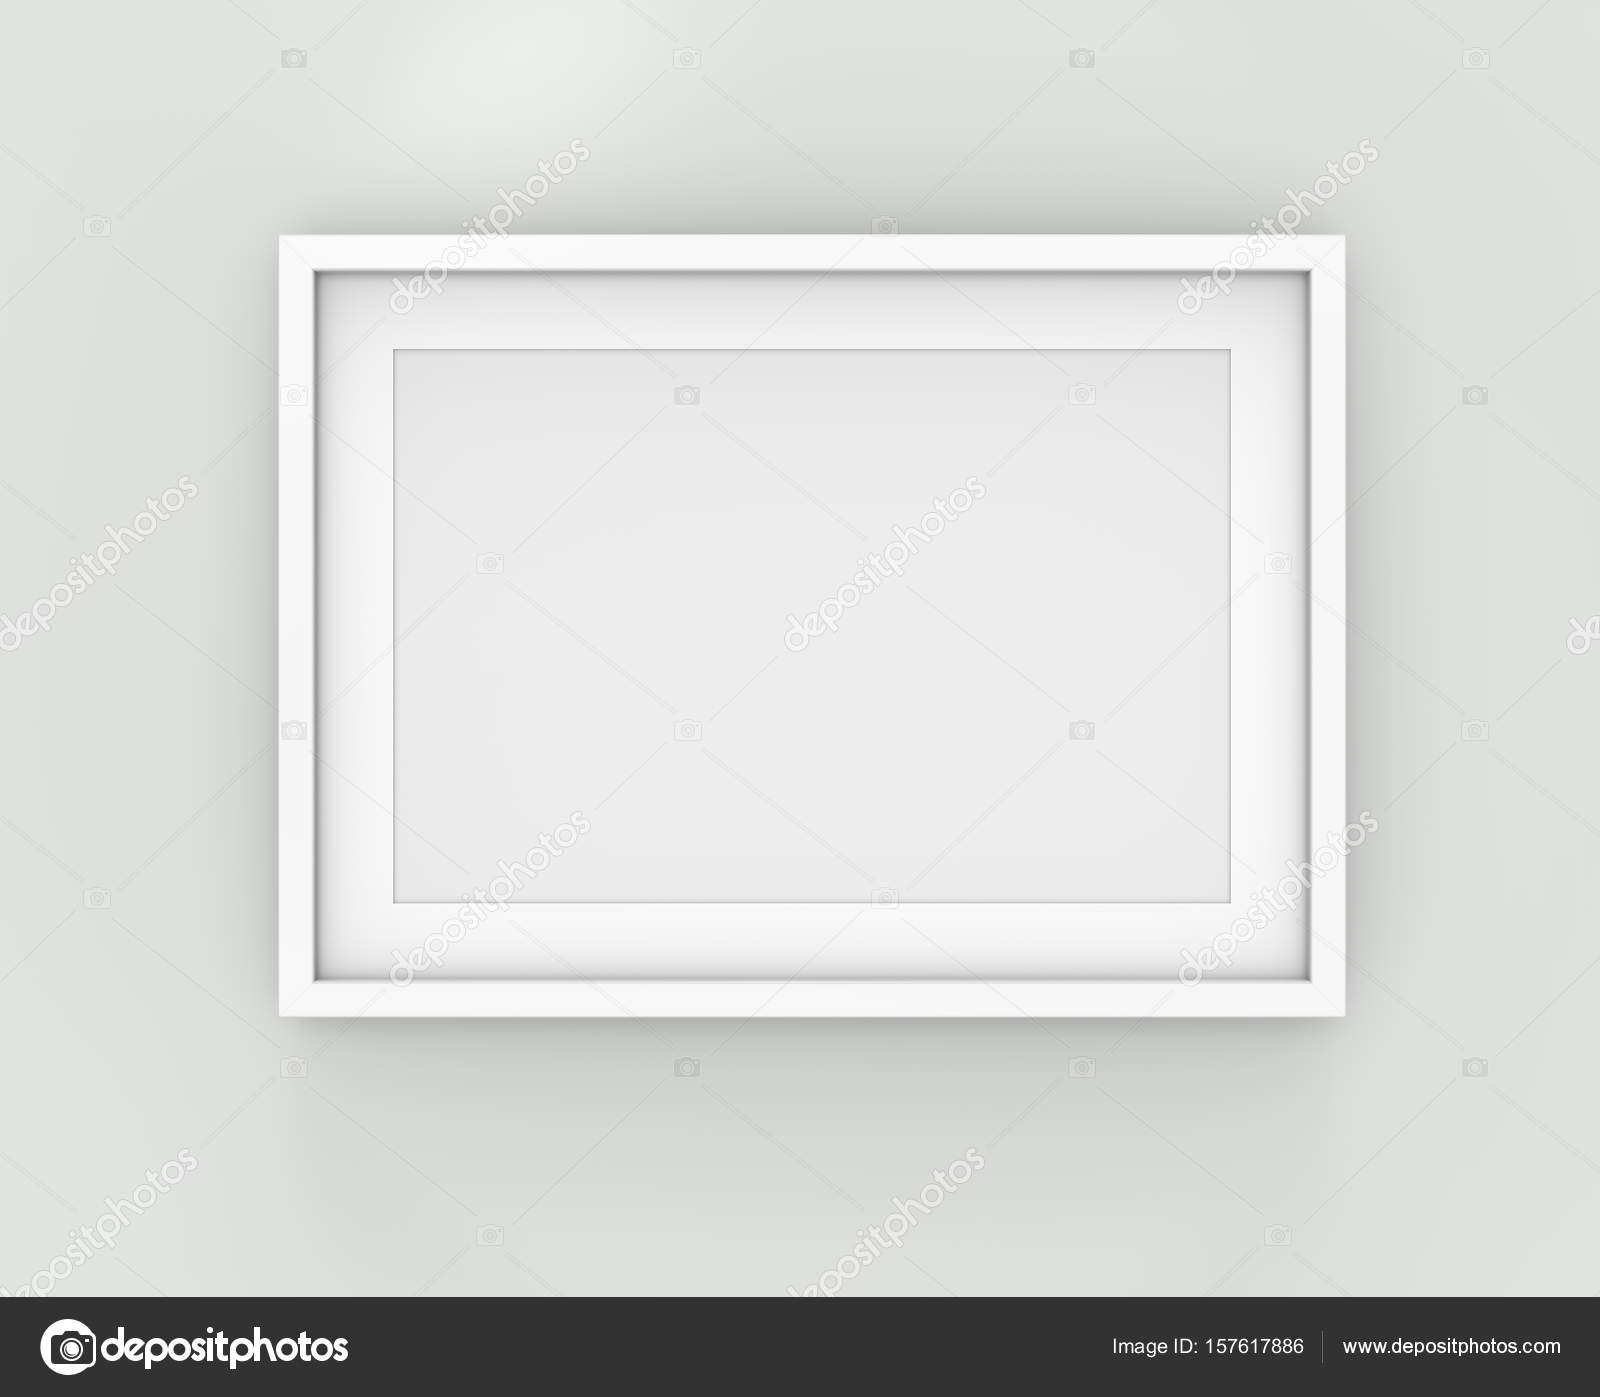 Picture frame on Wall. — Stock Photo © JohanH #157617886